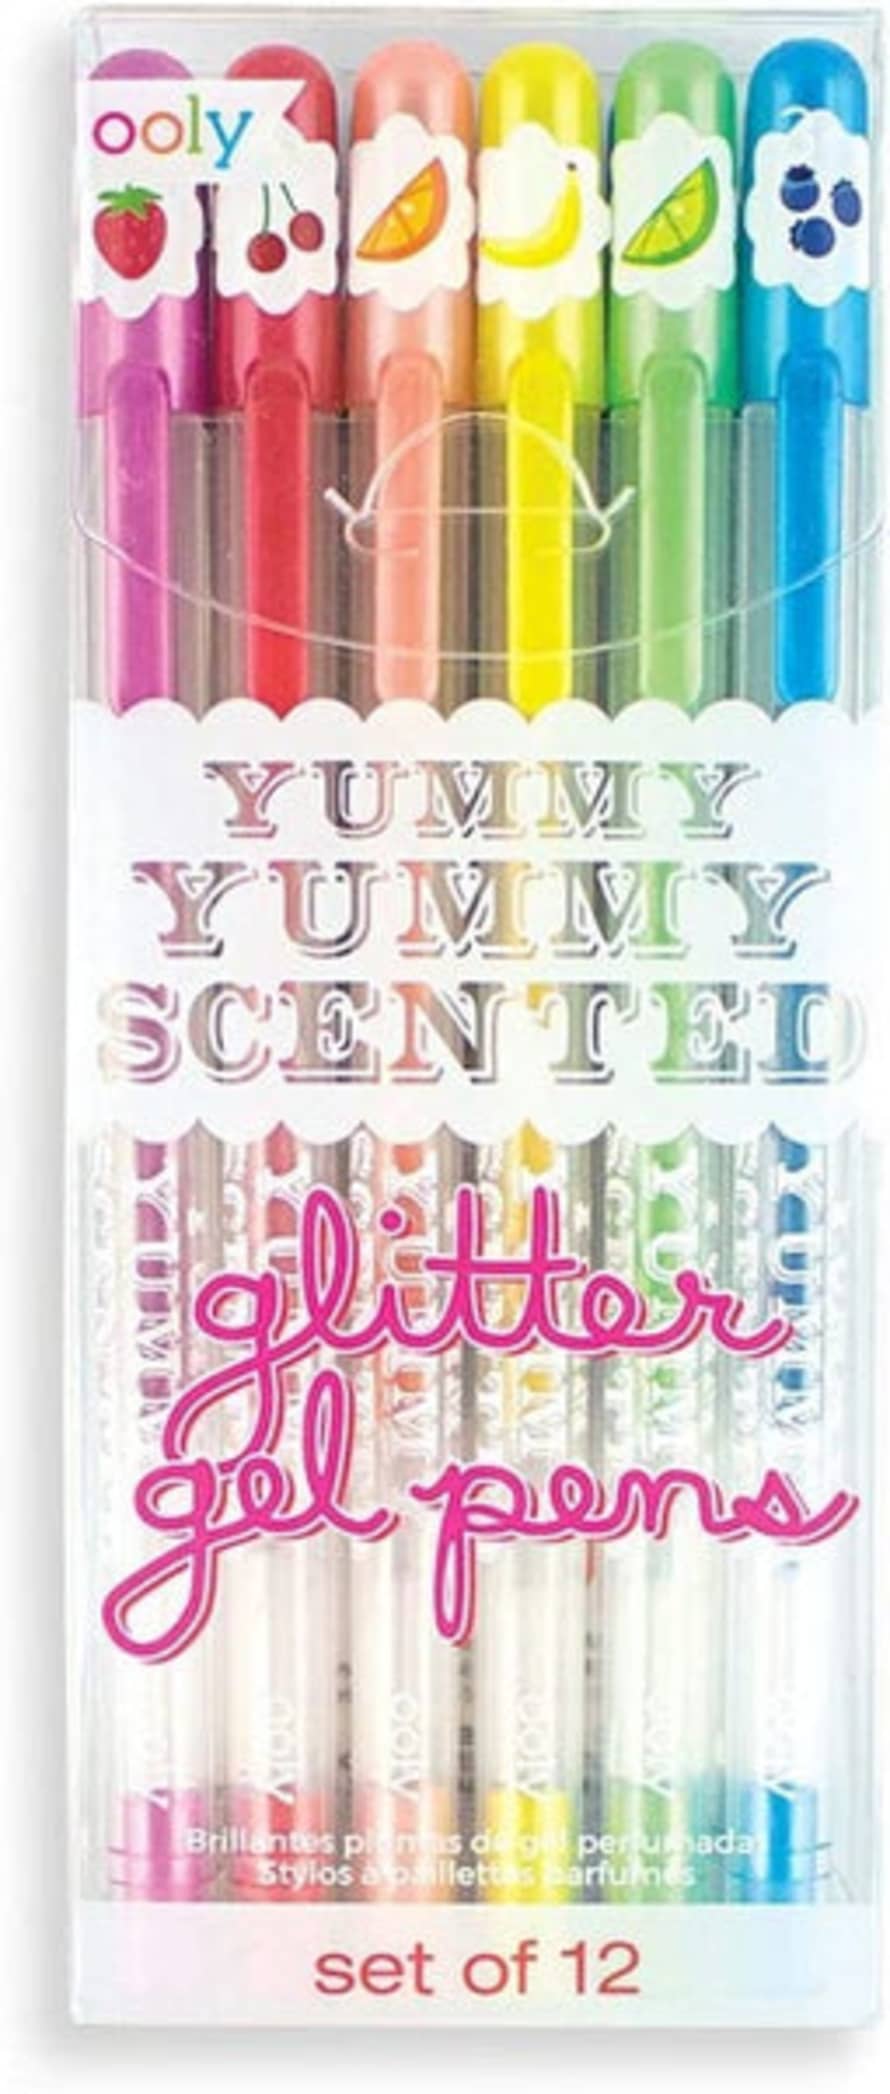 Ooly , Yummy Yummy Scented Glitter Gel Pens, Set Of 12